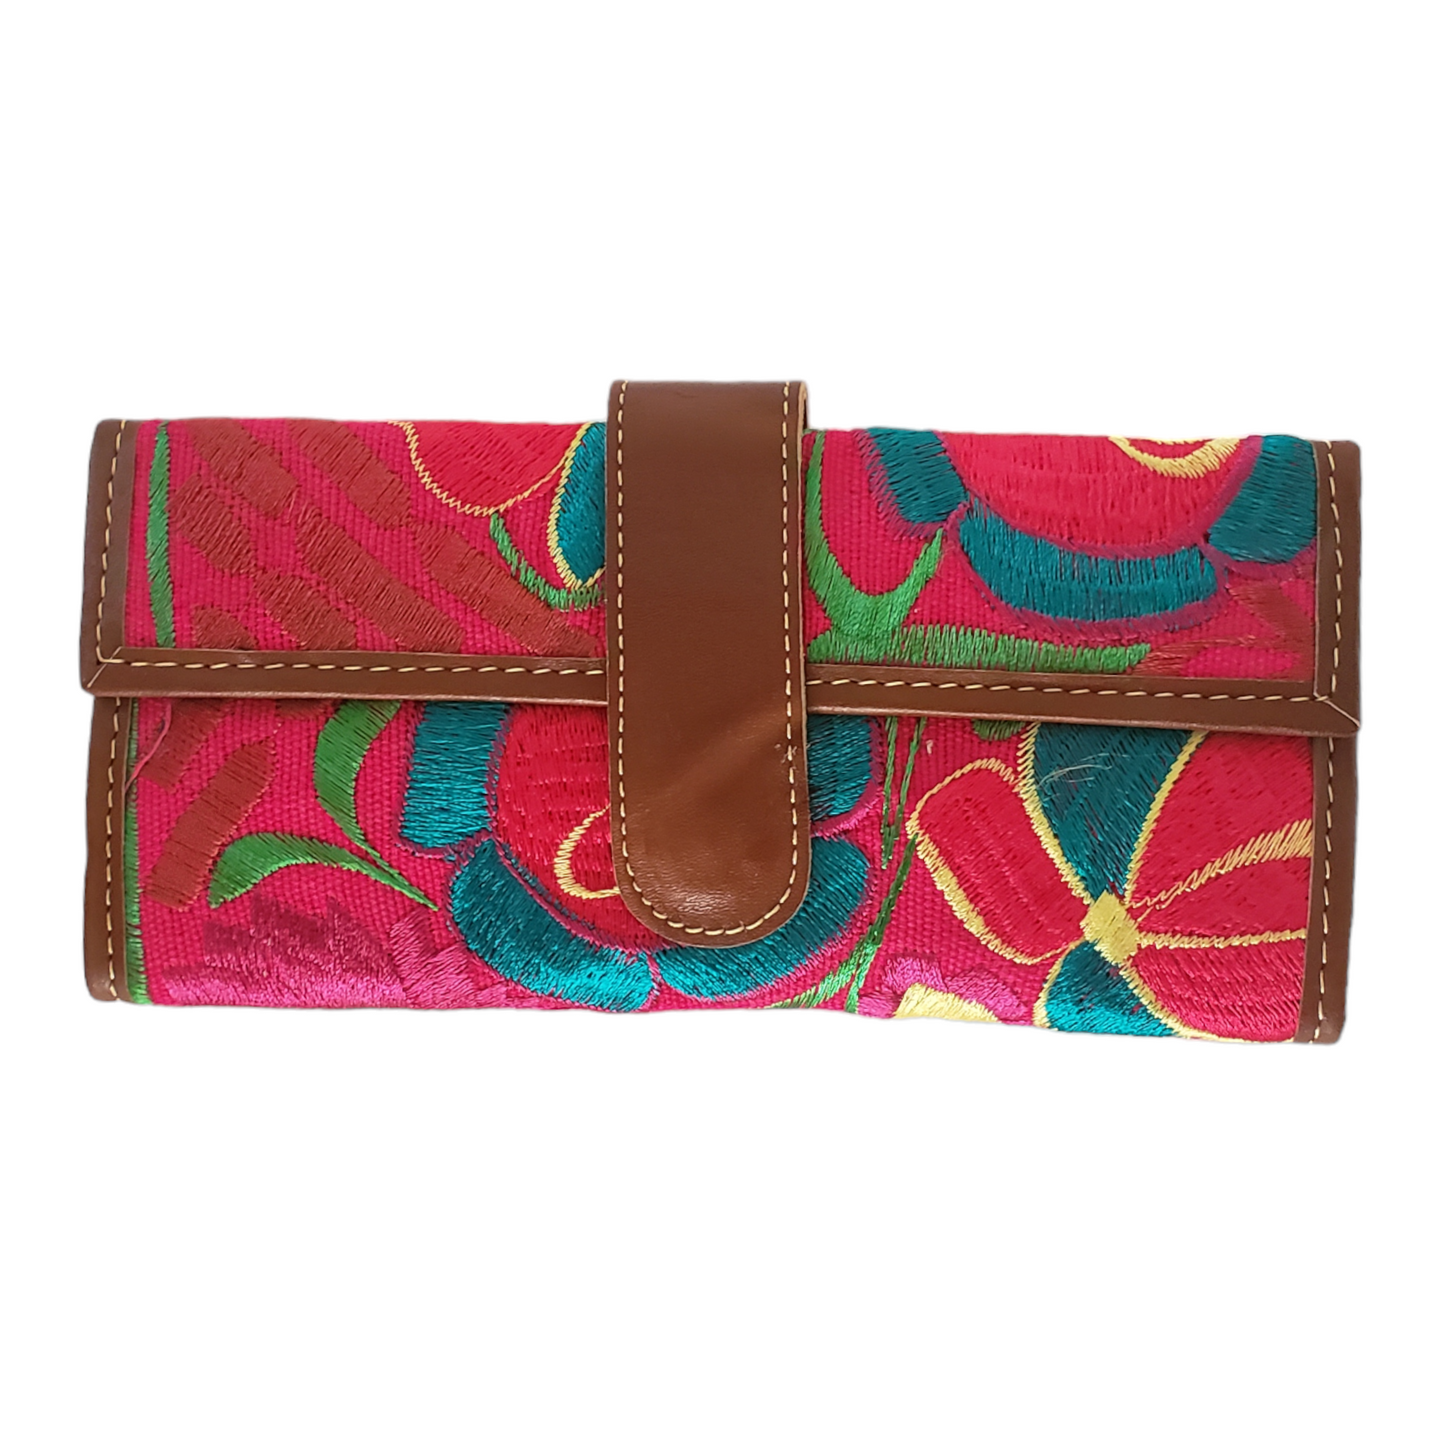 Handmade Embroidered Floral Wallet from Oaxaca